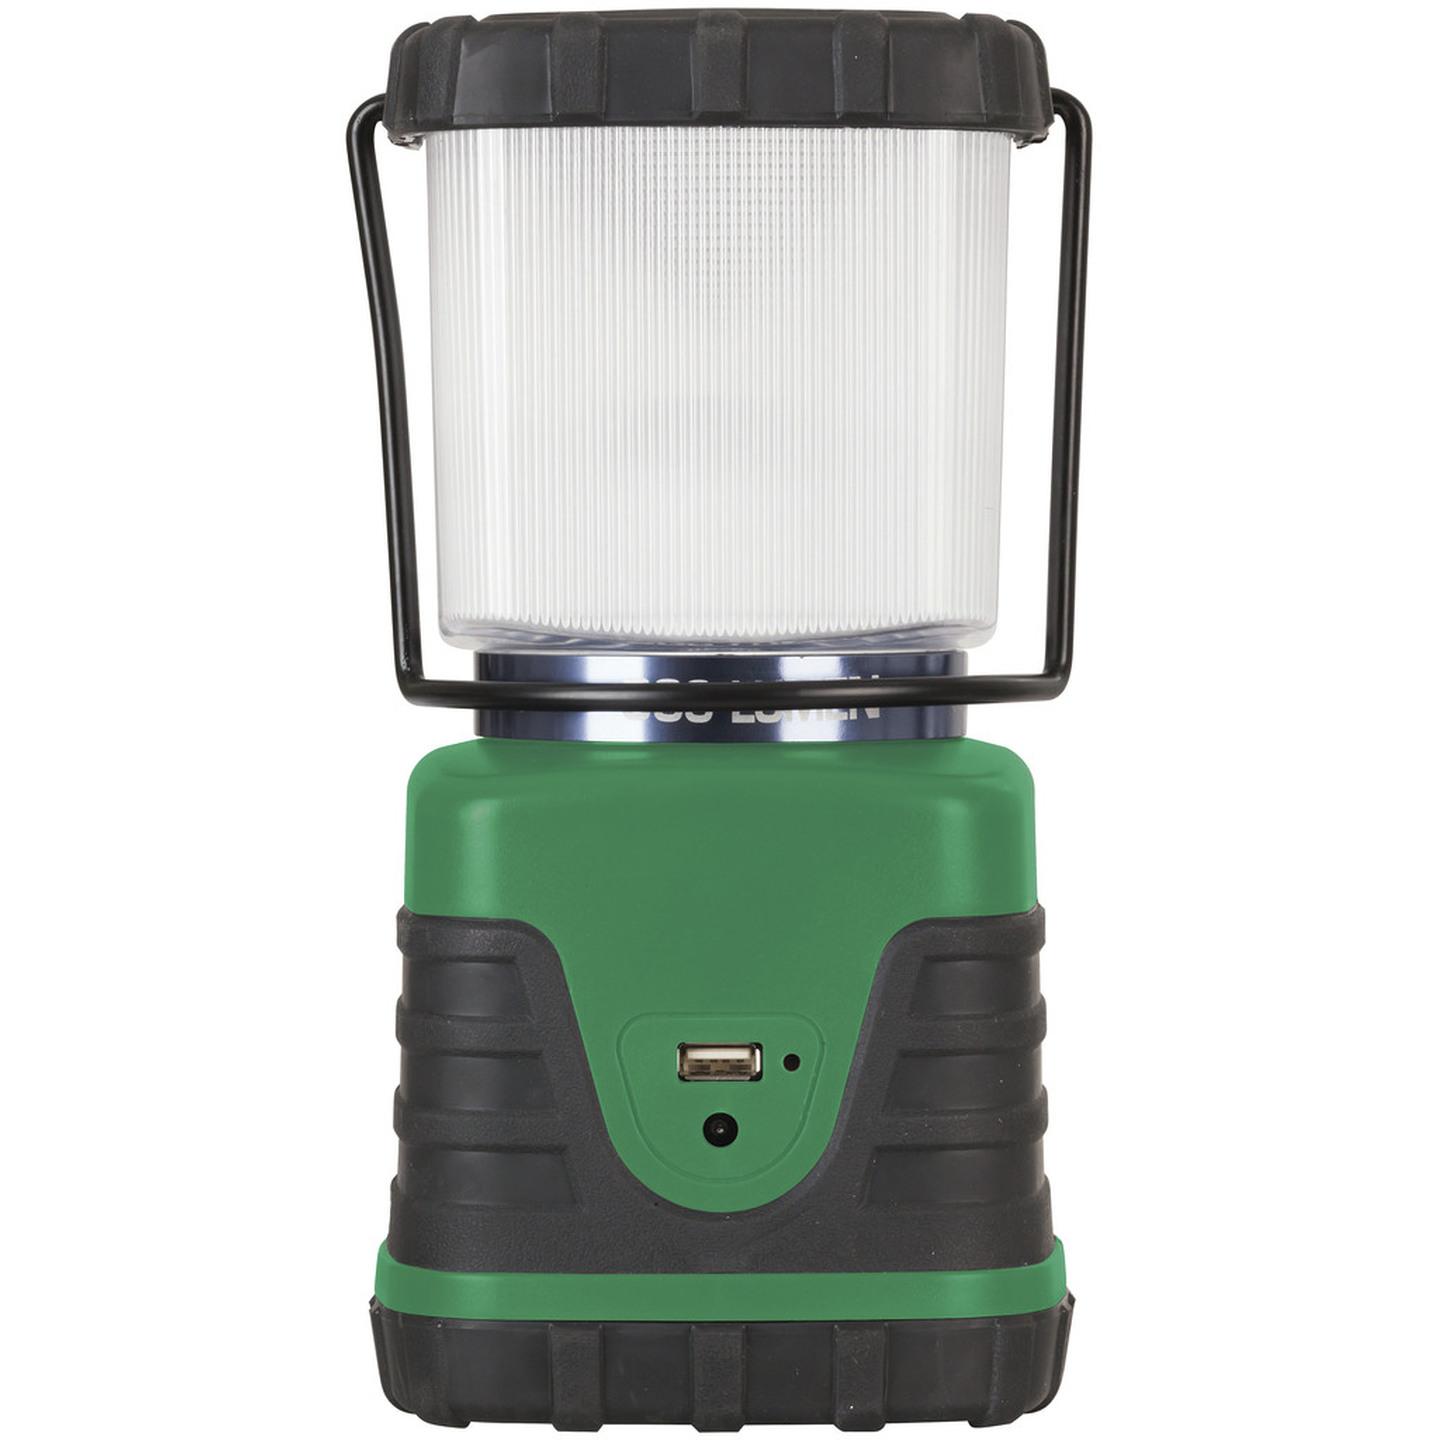 Rechargeable 600 Lumen Lantern with Cree LED and USB